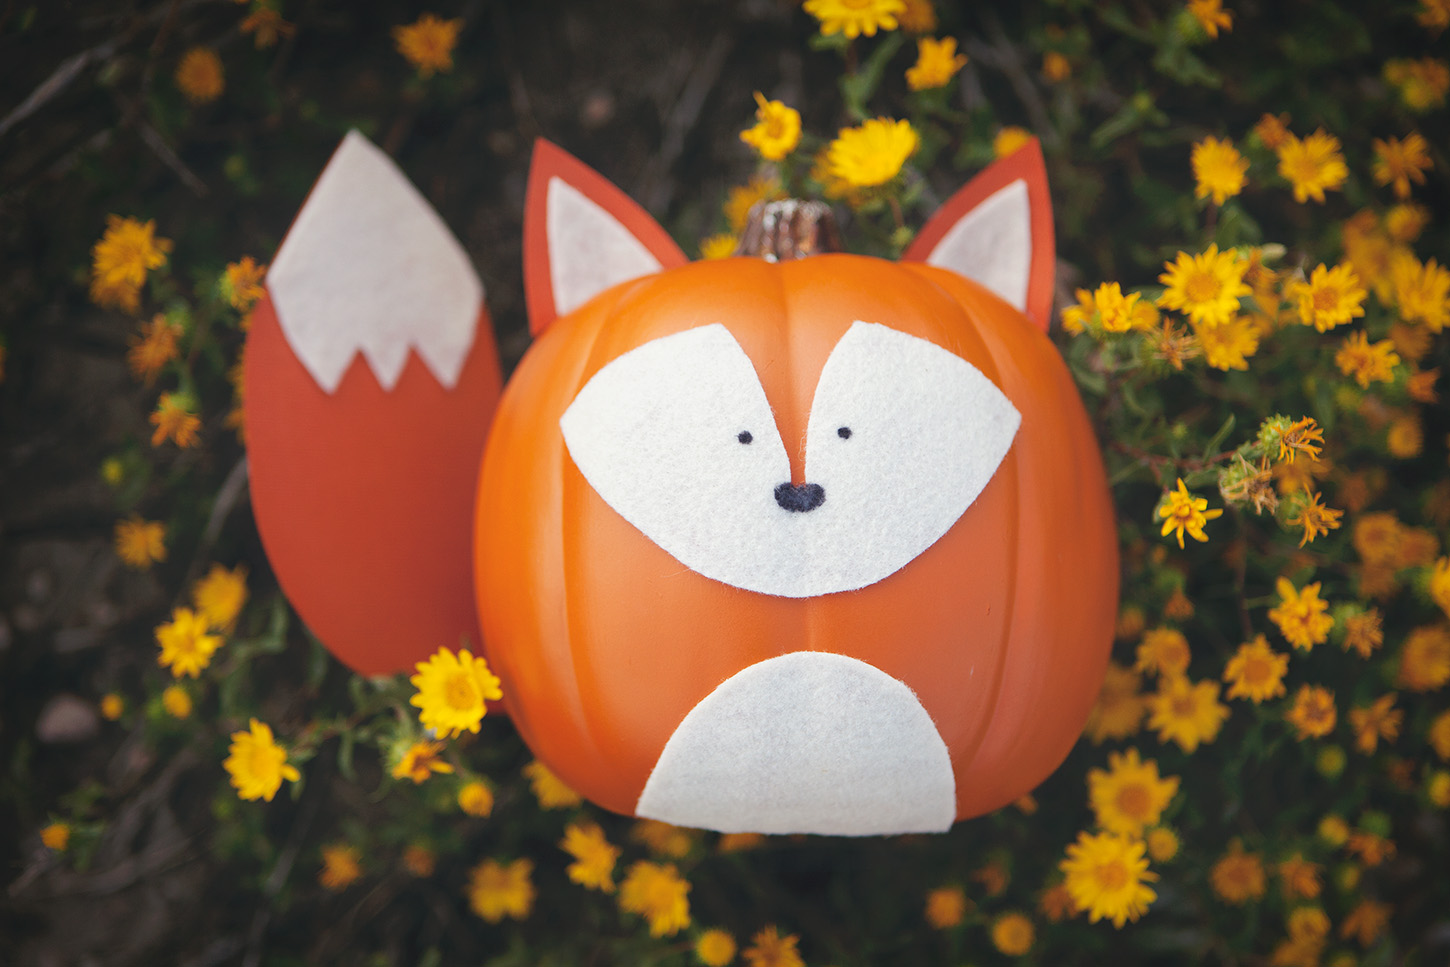 These Woodland Creature No-Carve Pumpkins are the perfect way to dress up your pumpkins this fall. If you love pumpkins, but loathe carving them, this is the project for you!